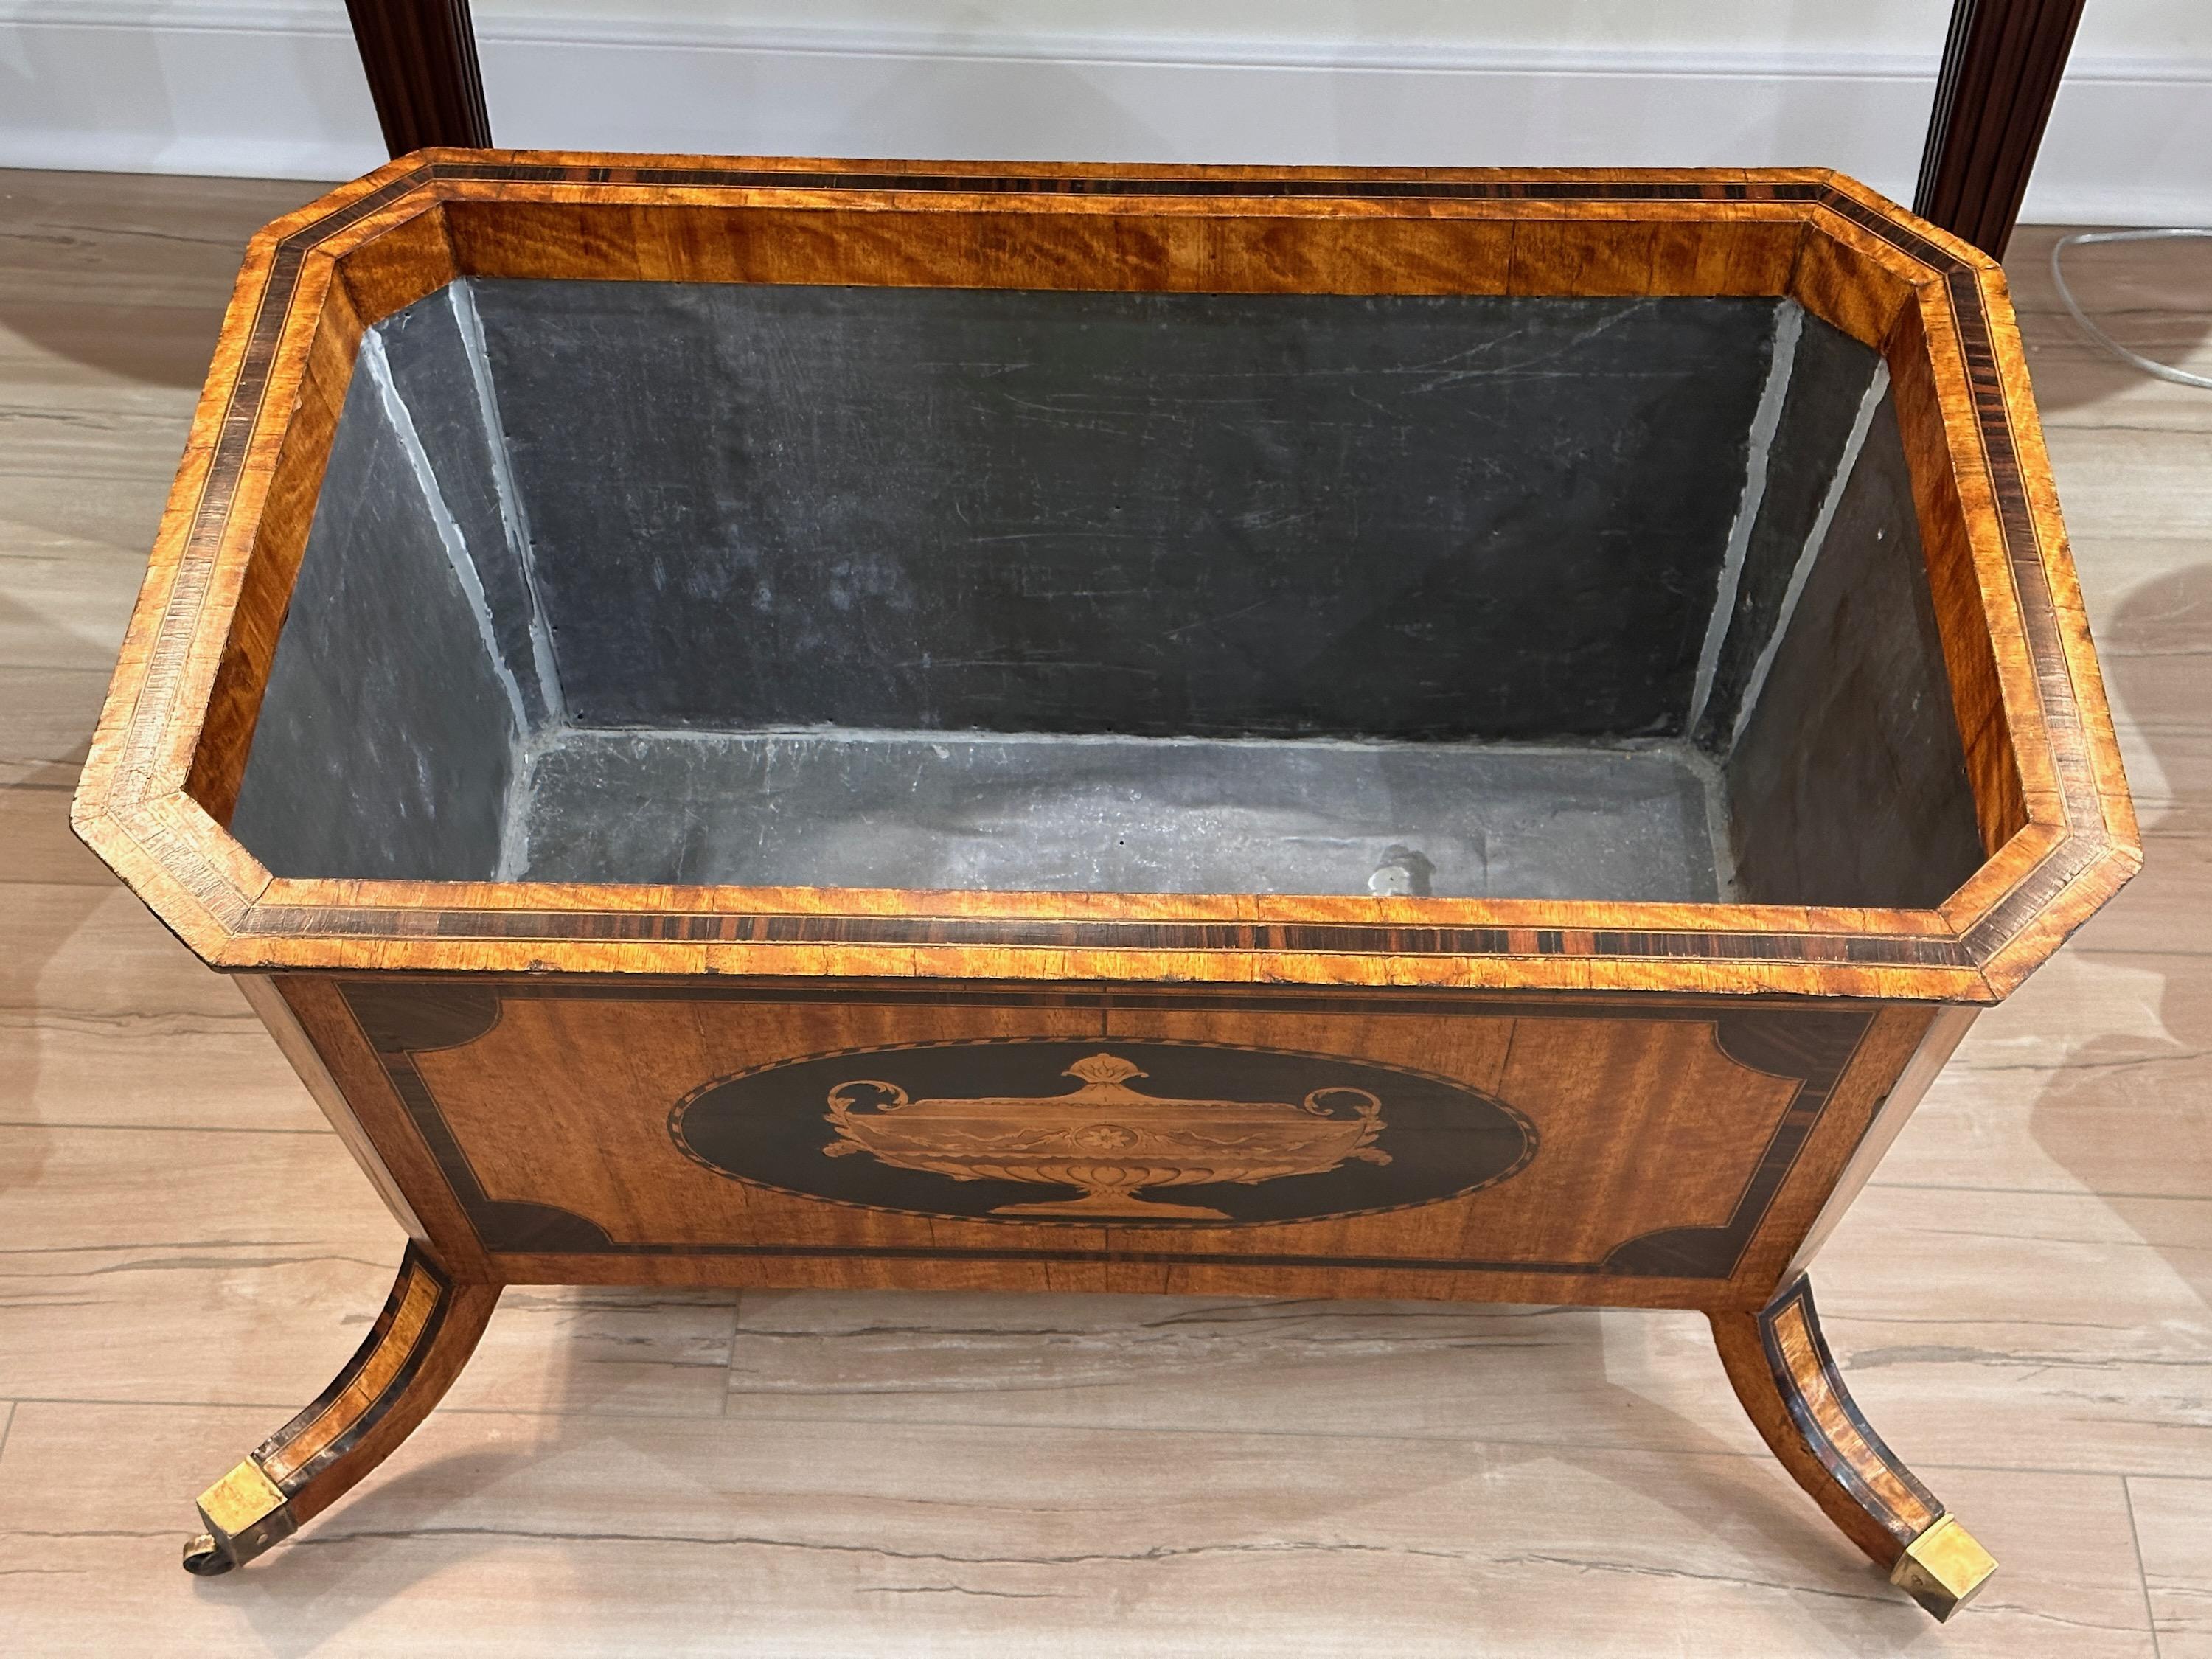 Hand-Crafted English Edwardian Period Regency Style Wine Cooler/Planter